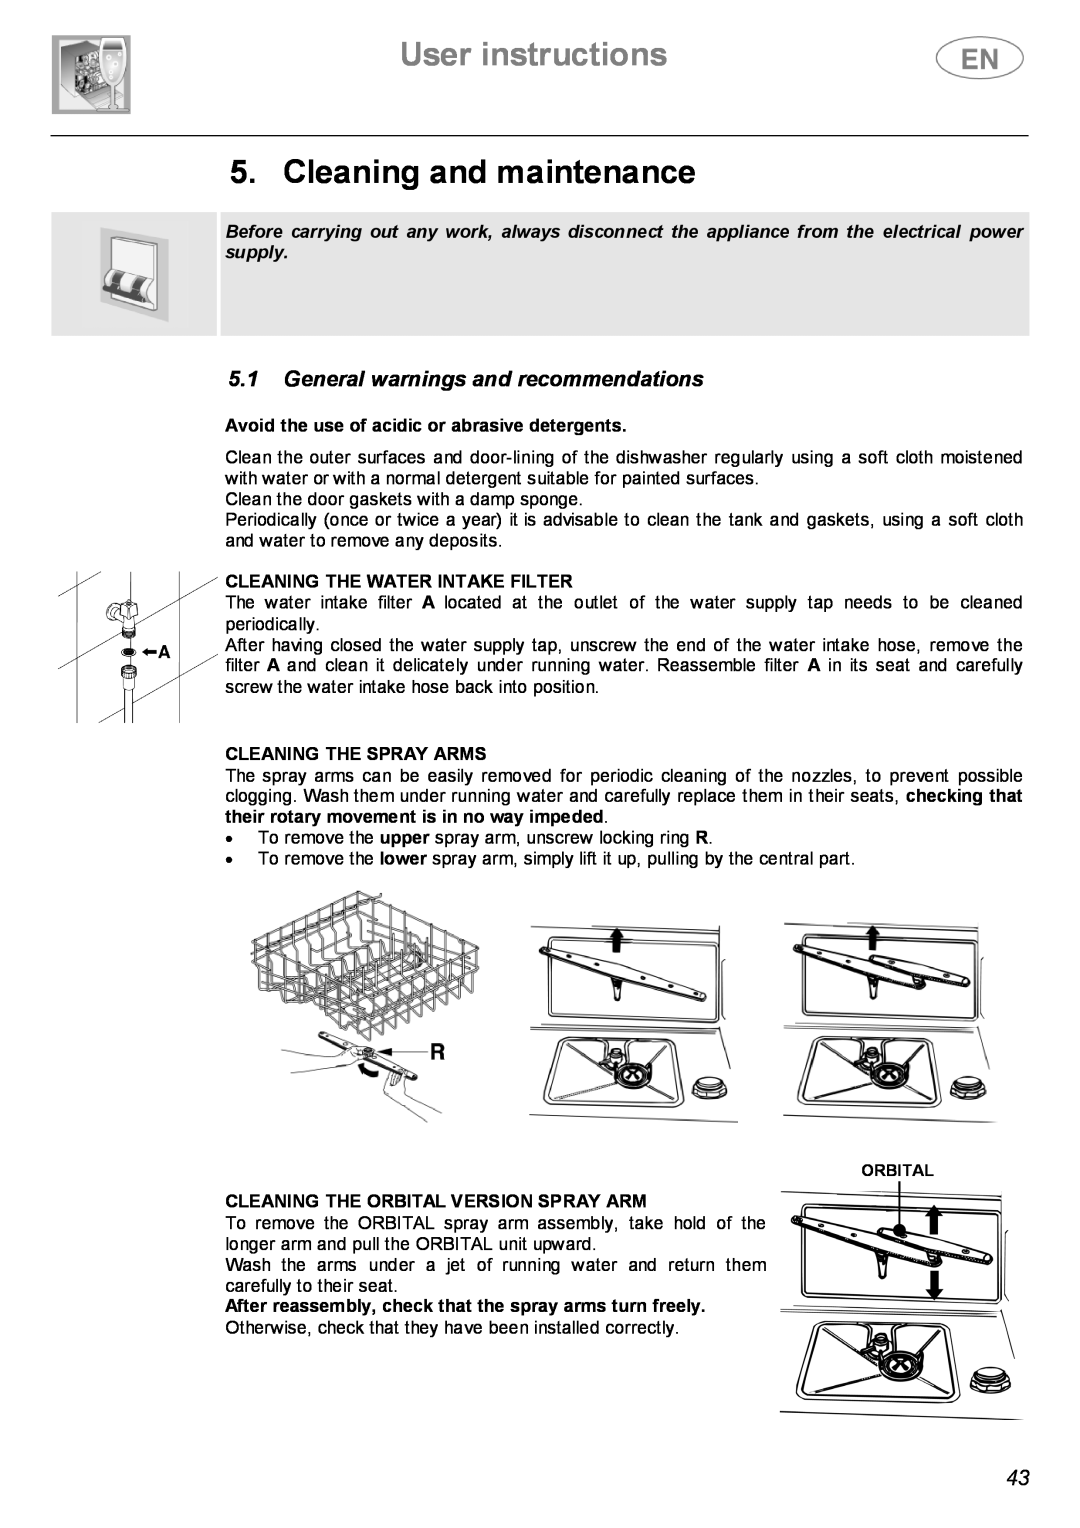 Smeg BL1 Cleaning and maintenance, User instructions, 5.1General warnings and recommendations, Cleaning The Spray Arms 